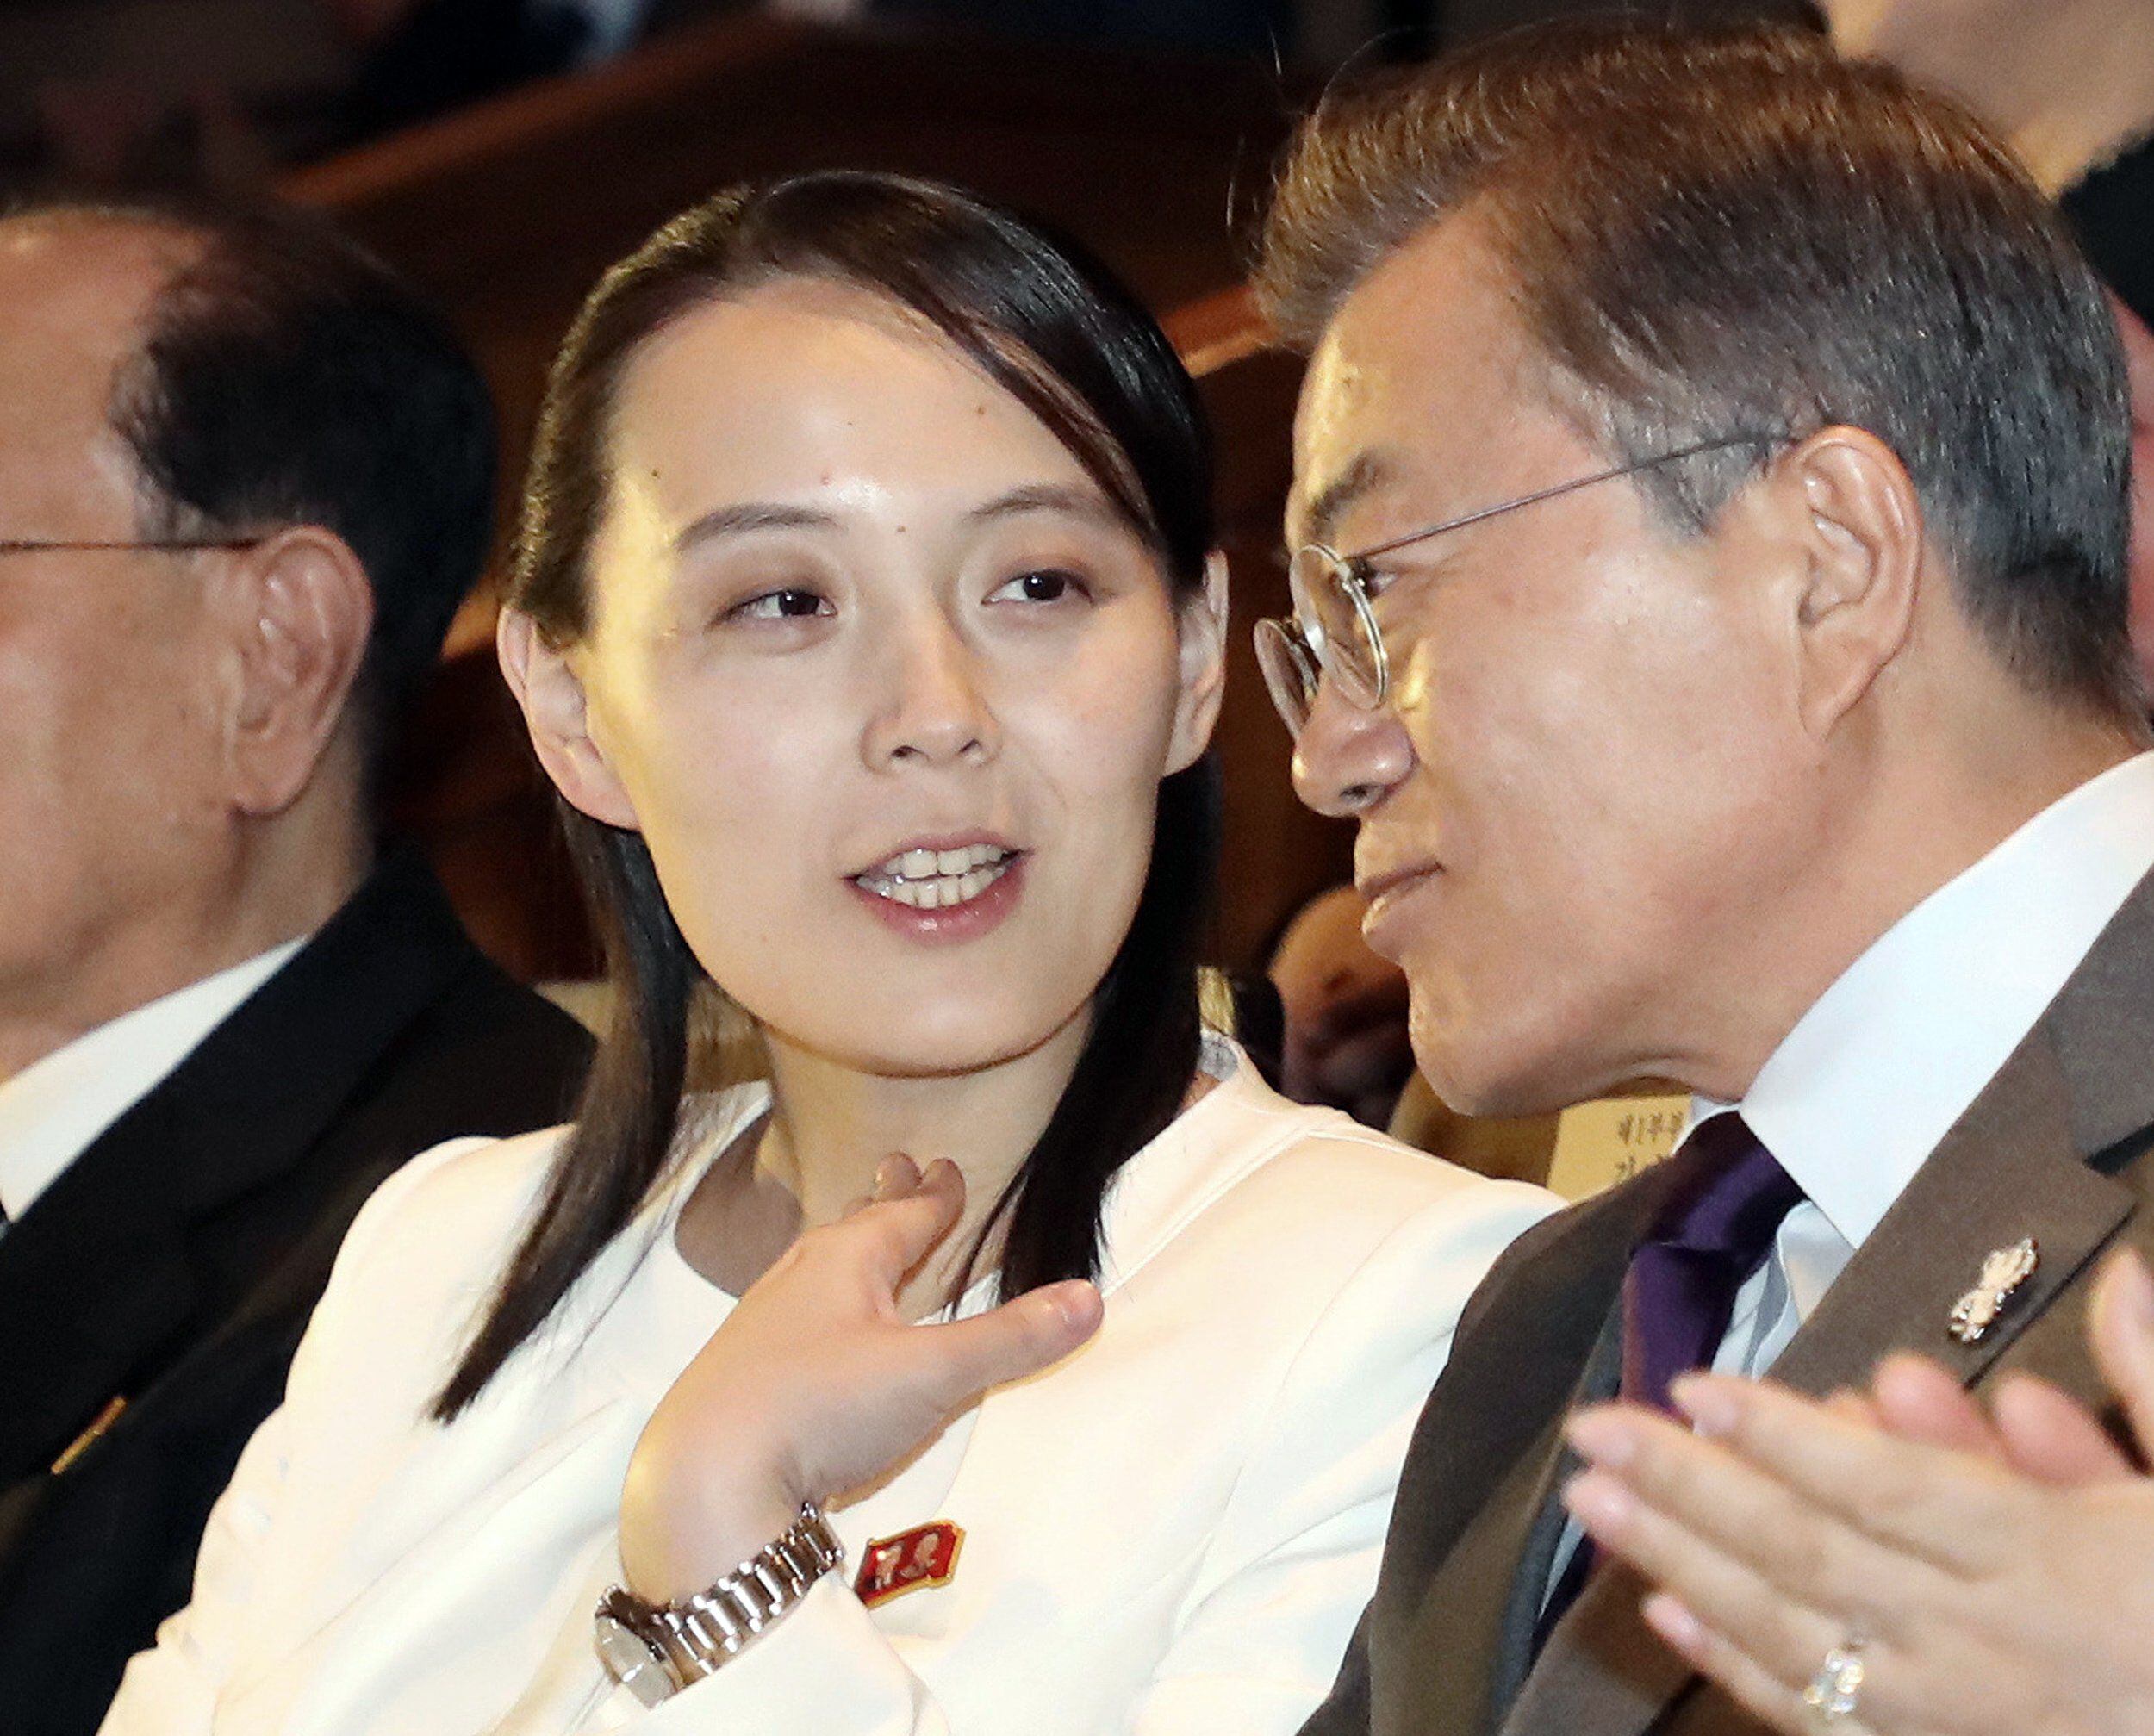 Kim Yo Jong chats with South Korean President Moon Jae-in as they watch a performance by North Korea's Samjiyon Orchestra at the National Theater in Seoul on February 11, 2018. (AP Photo)